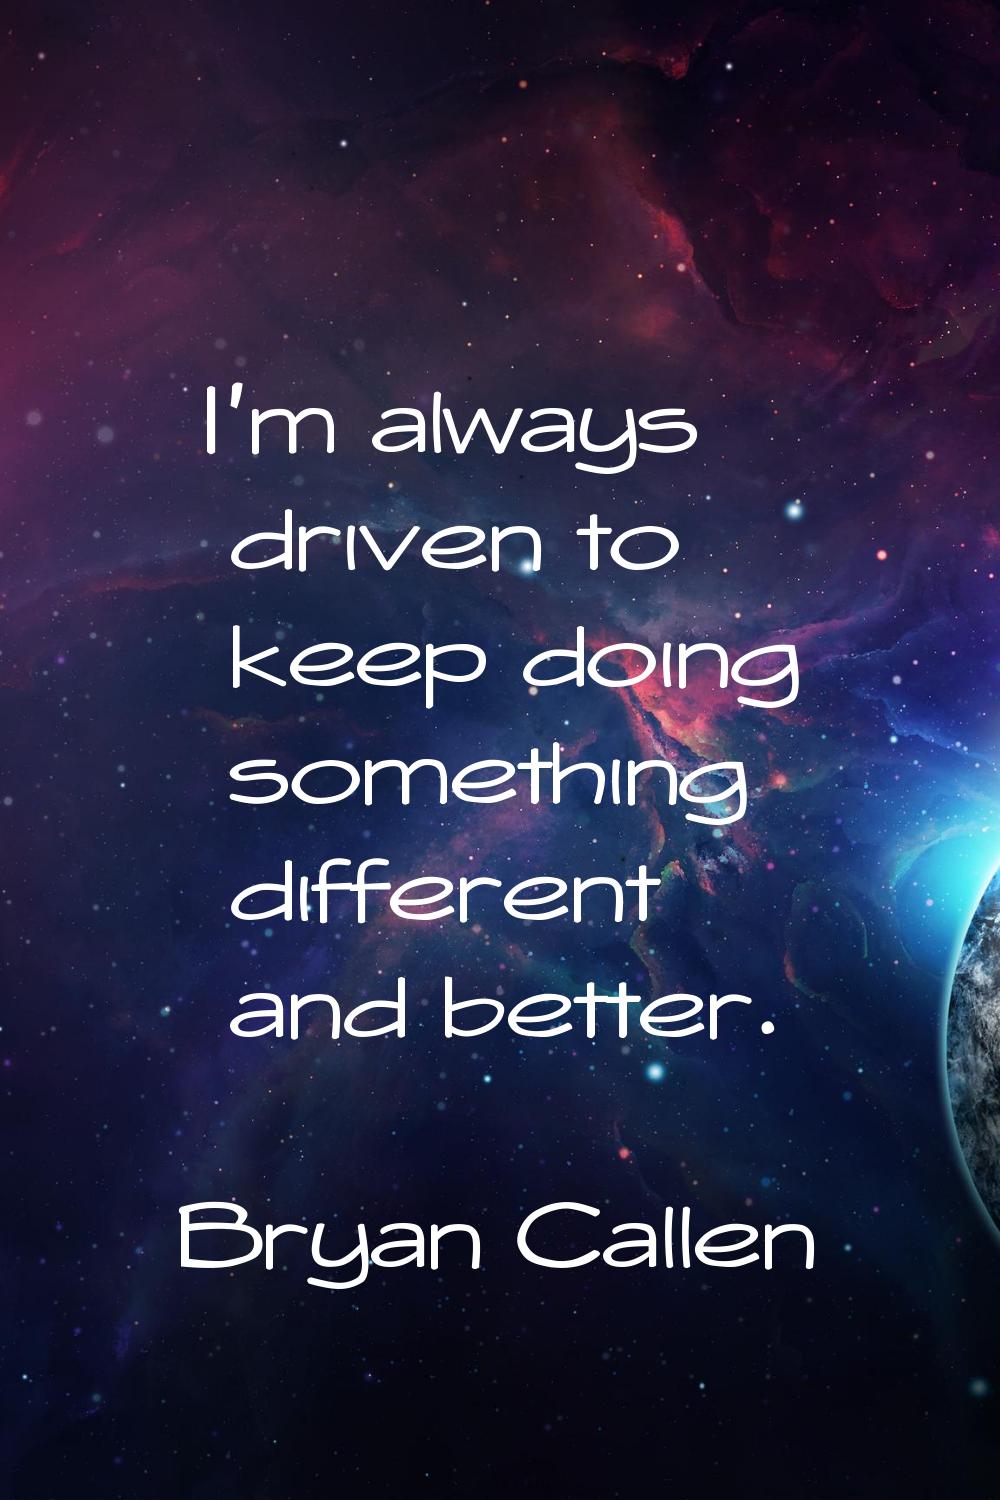 I'm always driven to keep doing something different and better.